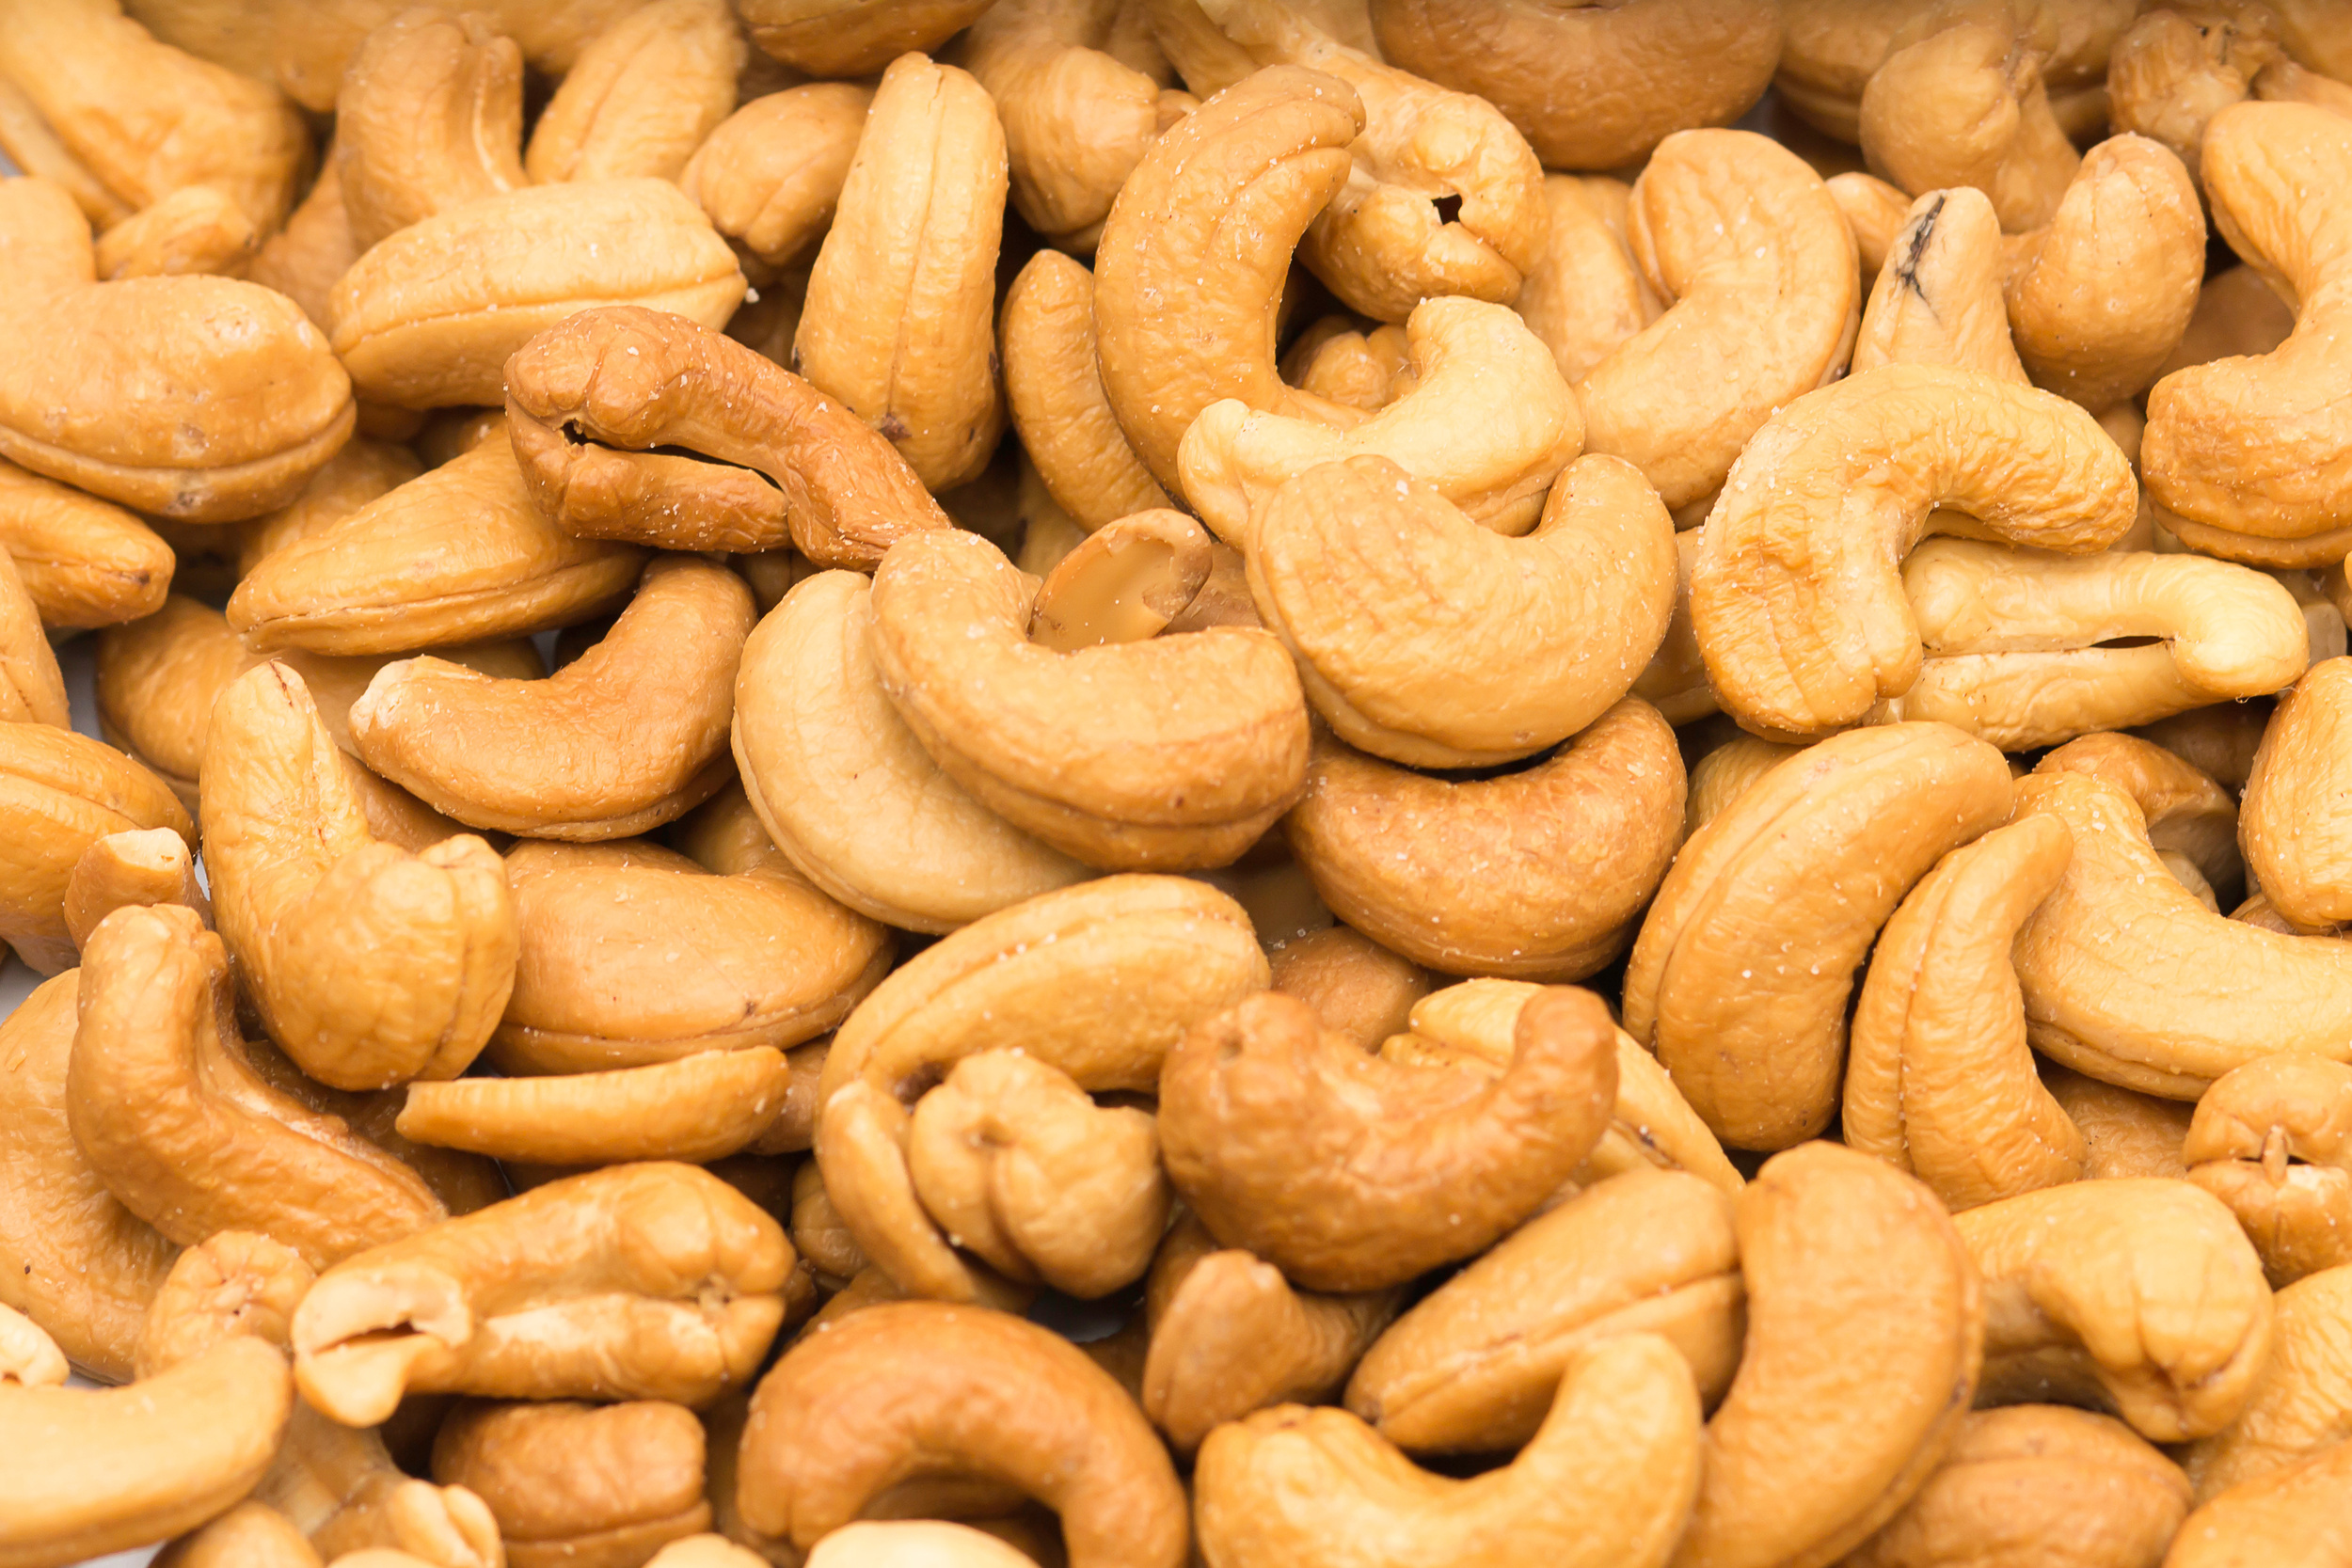 <p>Of course, cashews are a common contributor to our trail mix—they’re our favorite nut! Cashews are also tasty (especially with a bit of salt) and have some health benefits, as they contain healthy fats and essential vitamins and minerals, as well as 5 grams of protein and 1 gram of fiber in every ounce.</p><p>You may also like: <a href='https://www.yardbarker.com/lifestyle/articles/10_towns_in_the_netherlands_to_visit_other_than_amsterdam/s1__38441644'>10 towns in the Netherlands to visit other than Amsterdam</a></p>